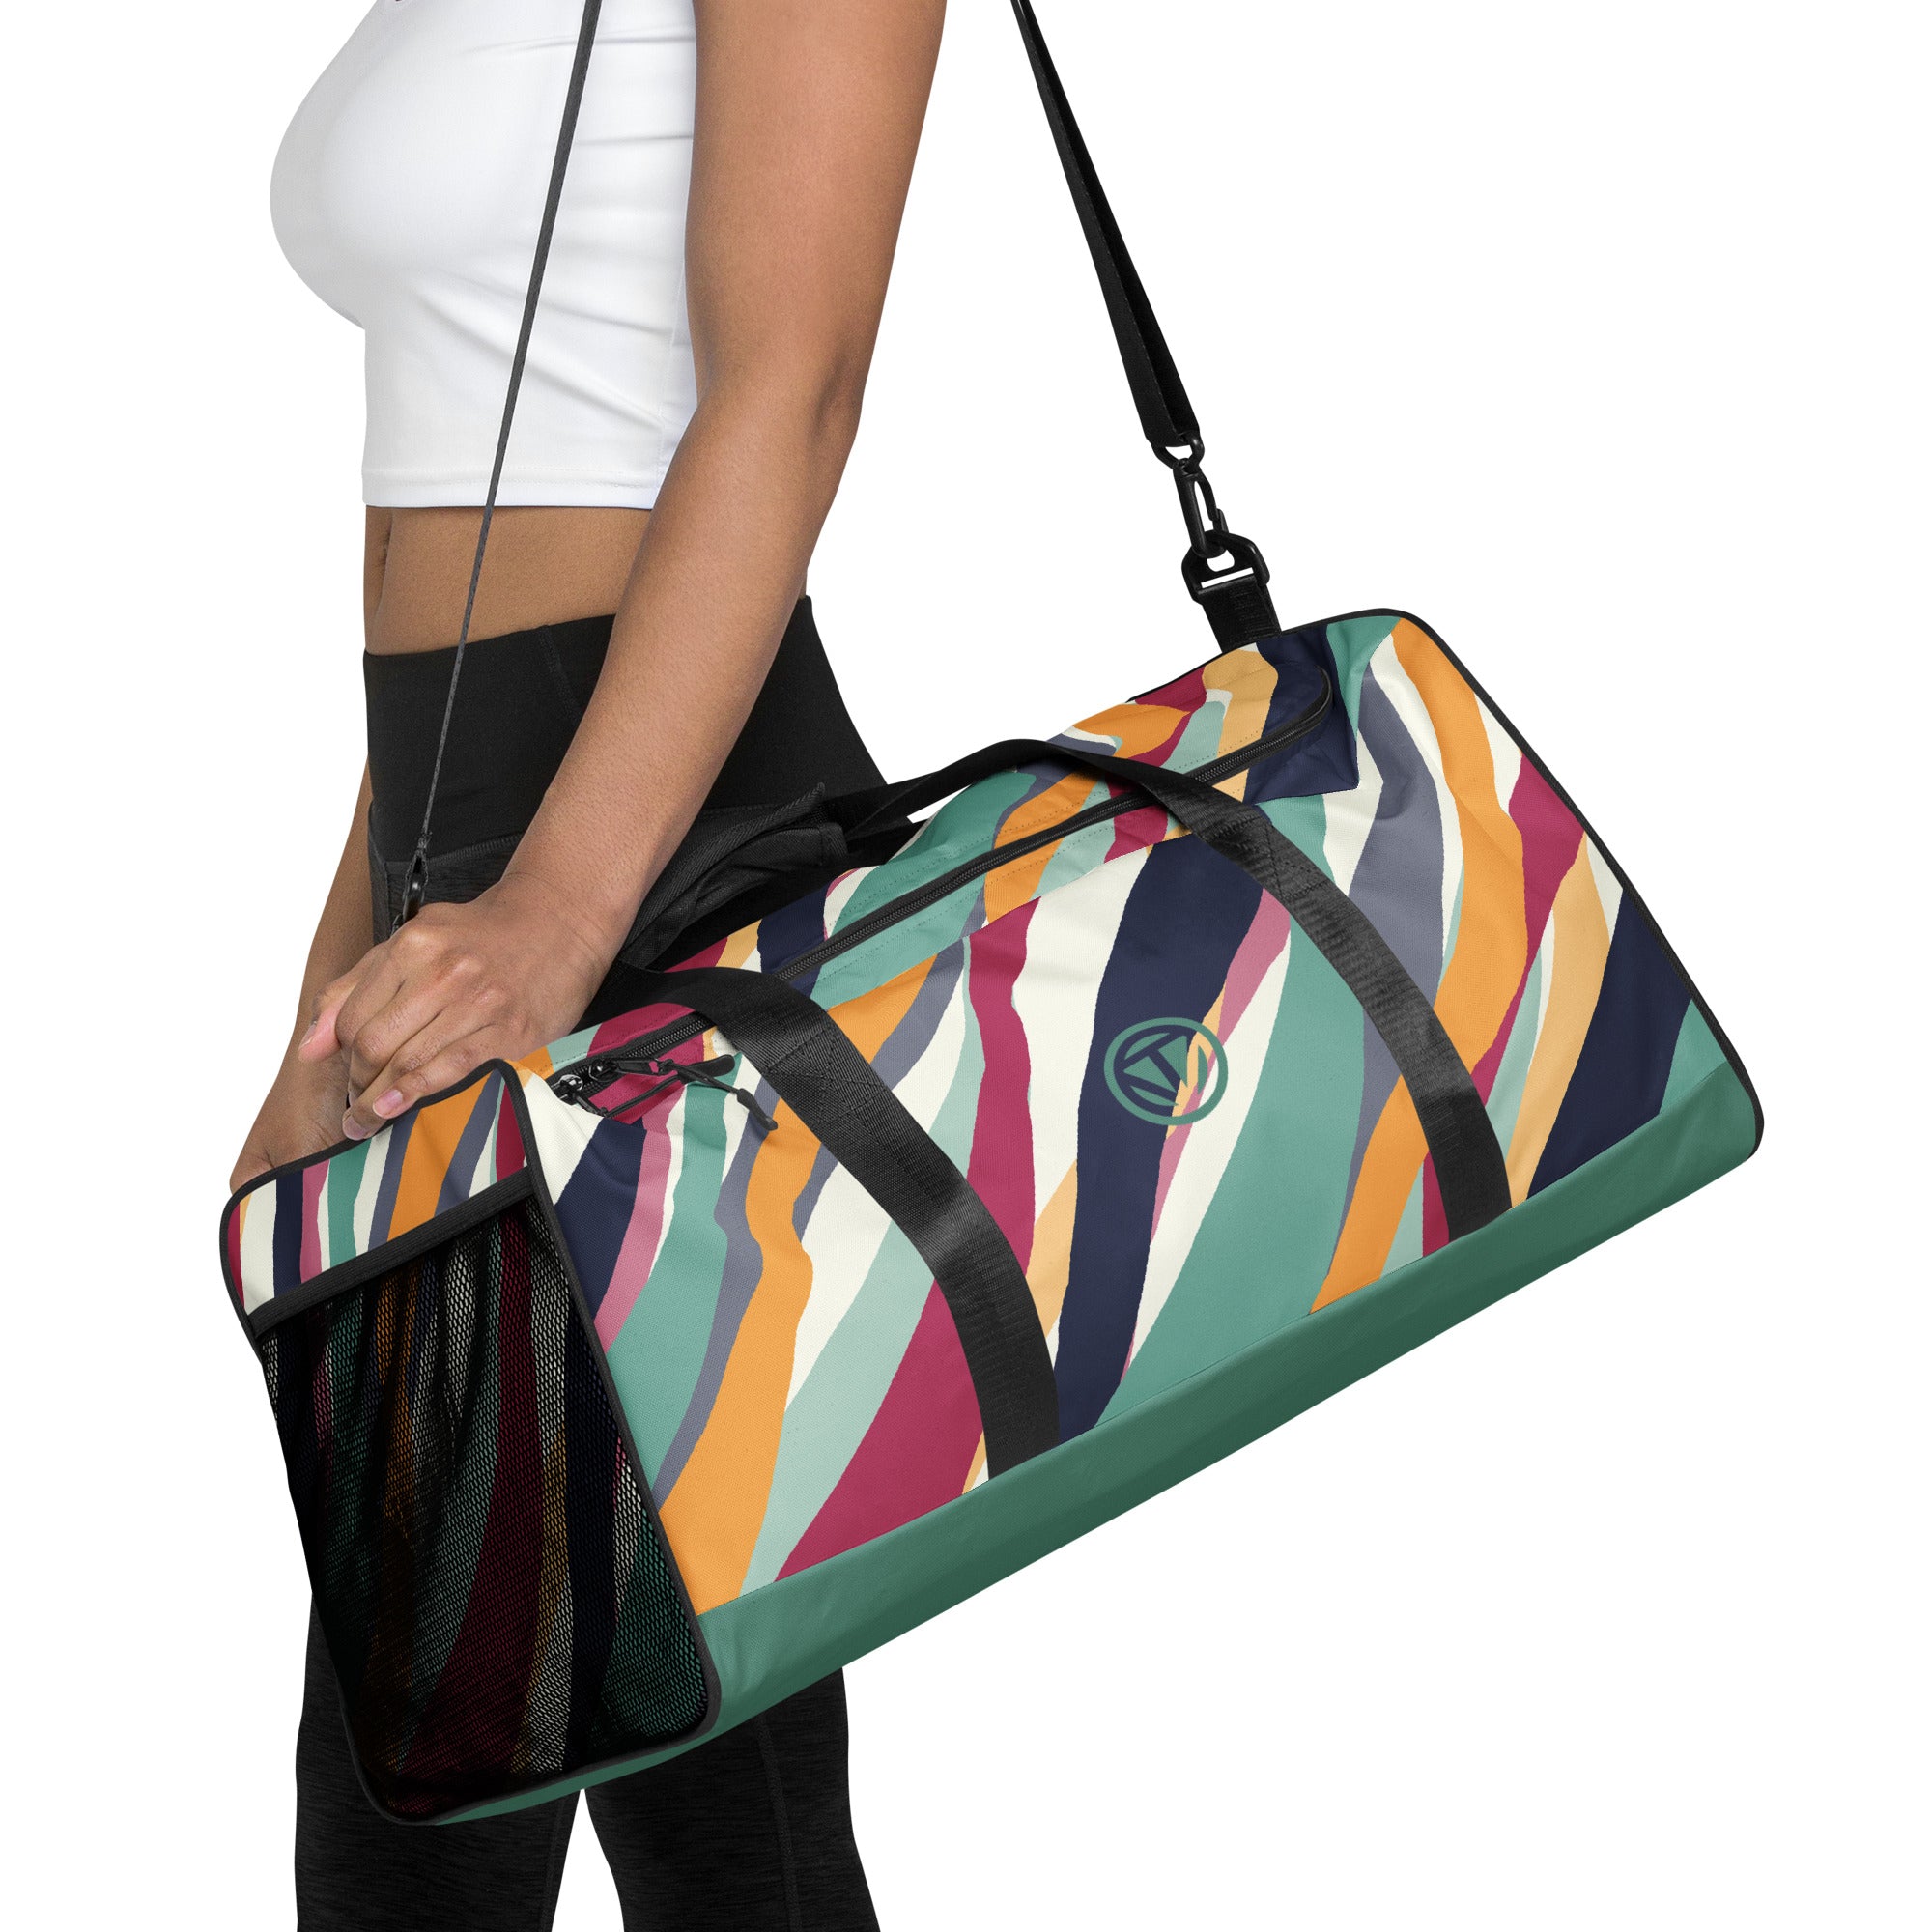 TIME OF VIBES TOV Reisetasche COLORS - €99,00